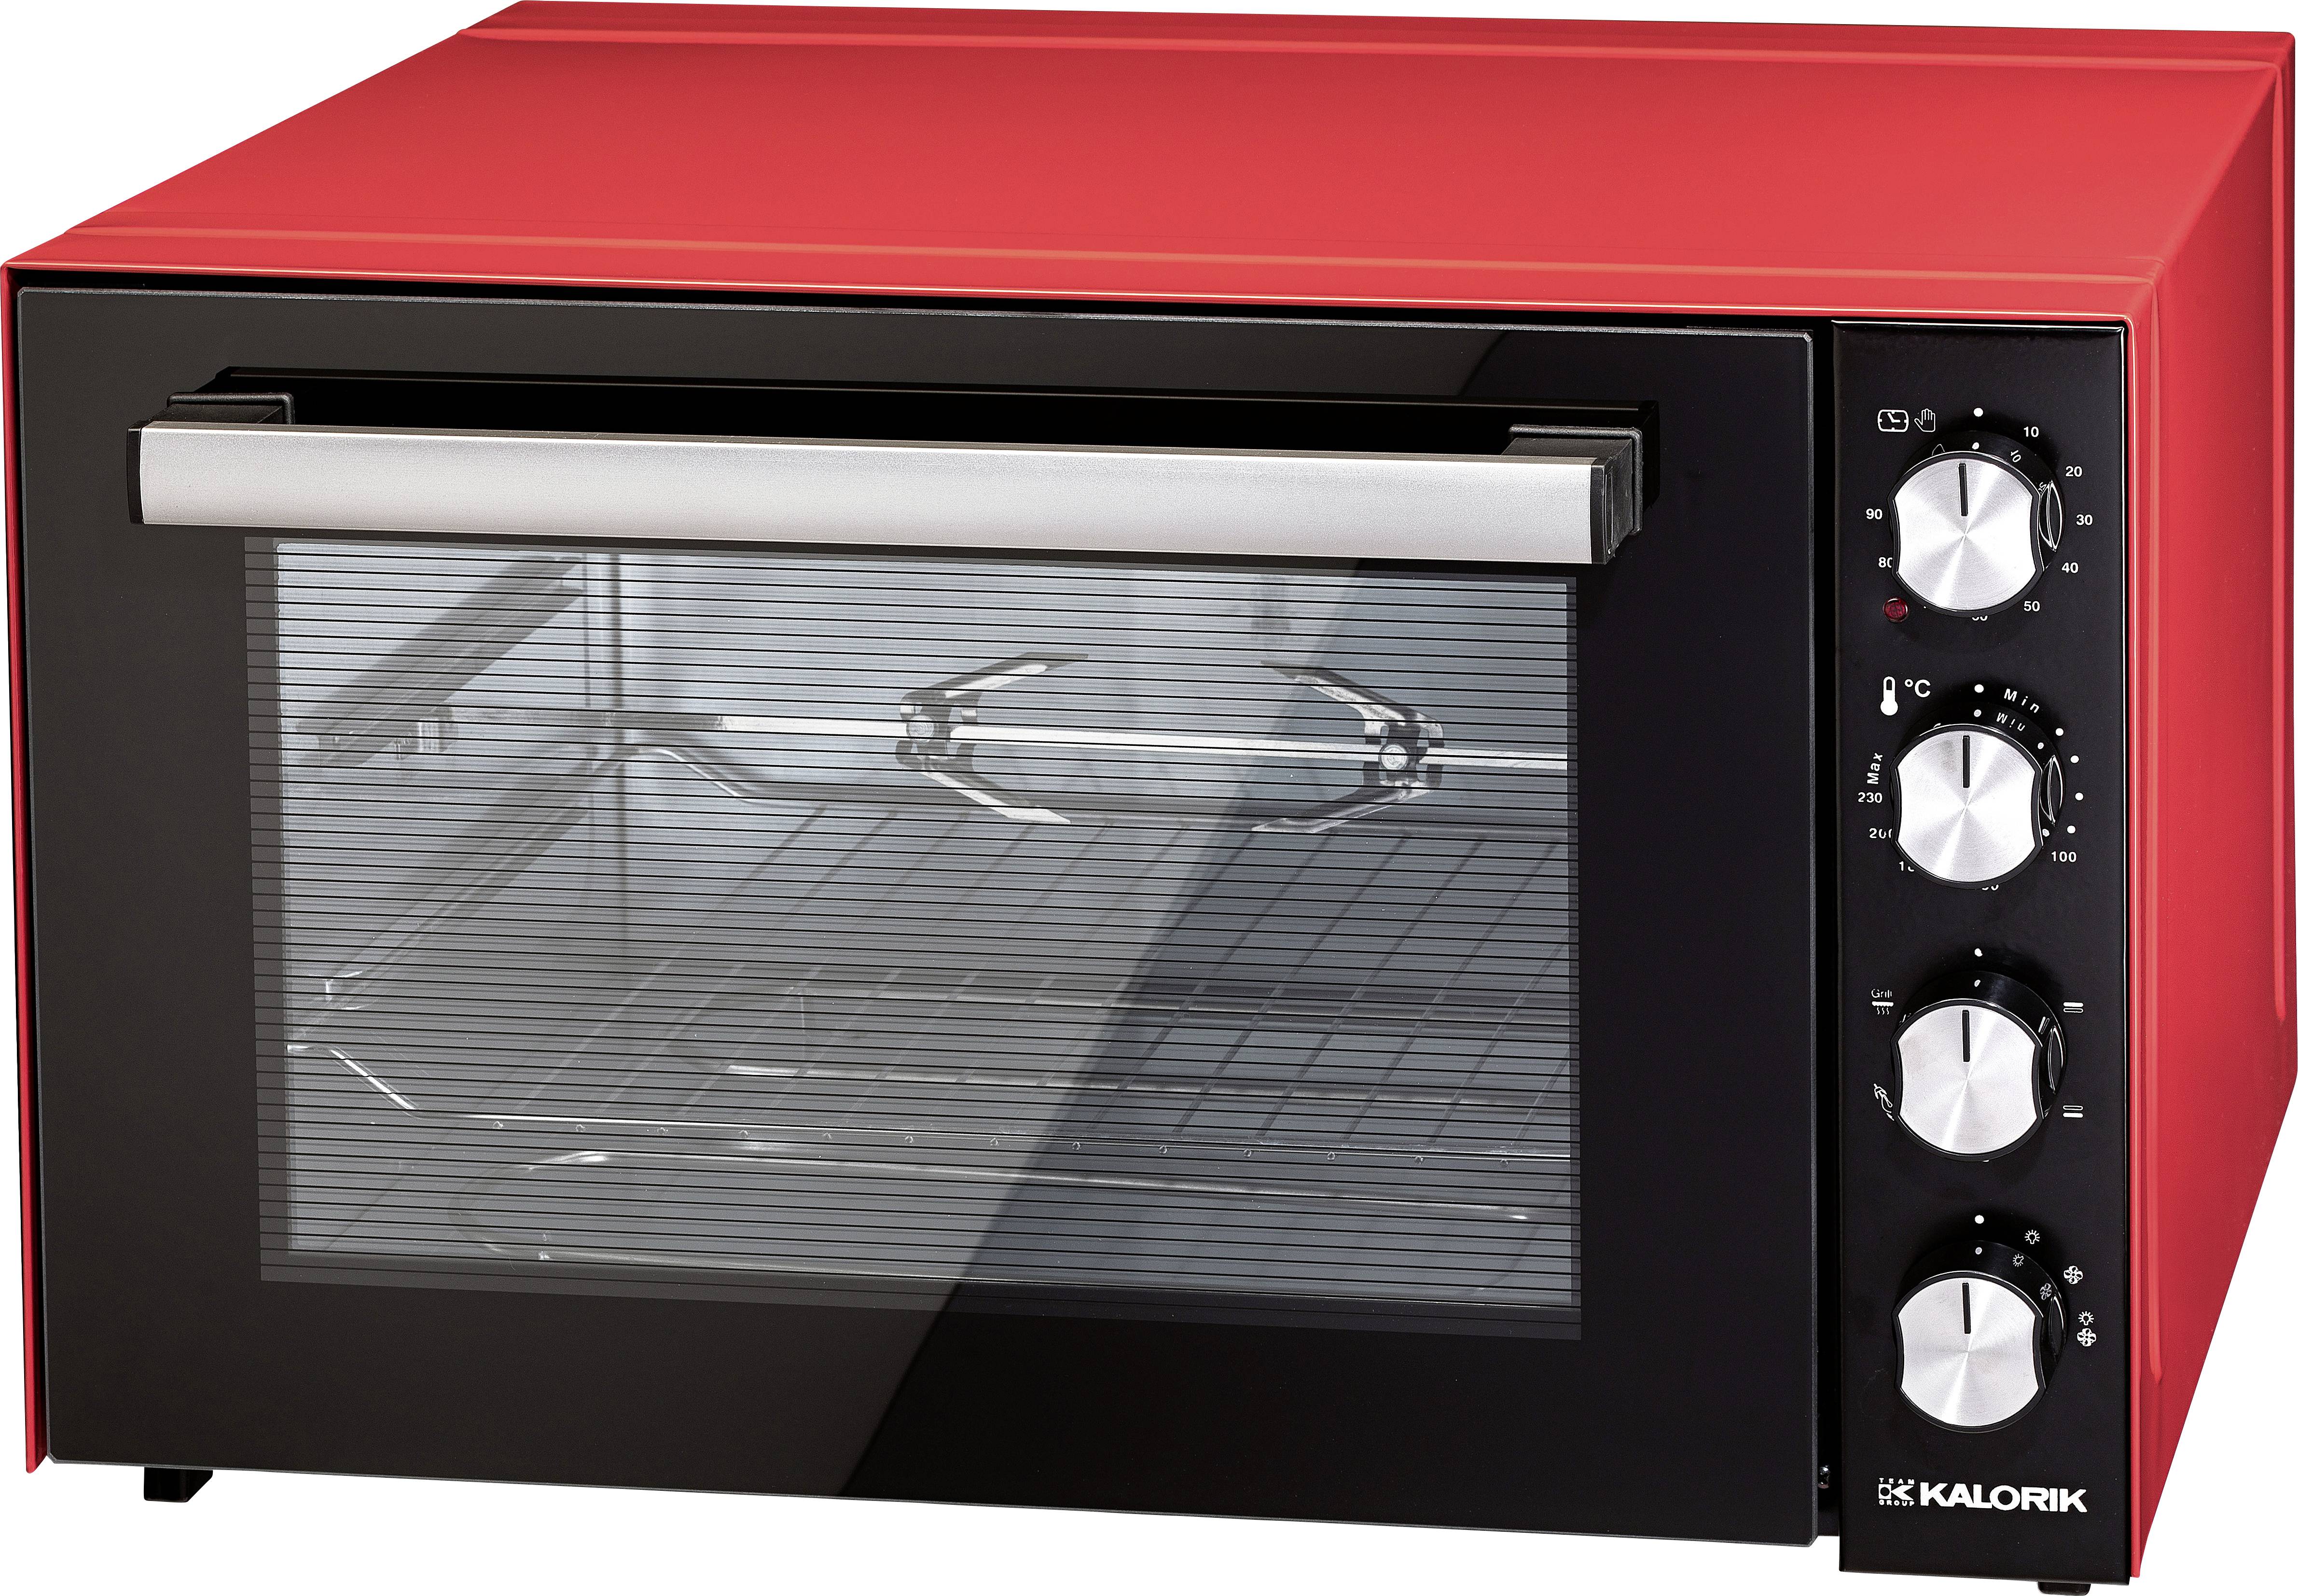 Team Kalorik Retro Mini Oven with Baking Tray TKG OT 2500 R Wire Rack and removeable tray handle 1300 W Red 0-230°C Metal/Glass/Synthetic materiaL 19.5 L 